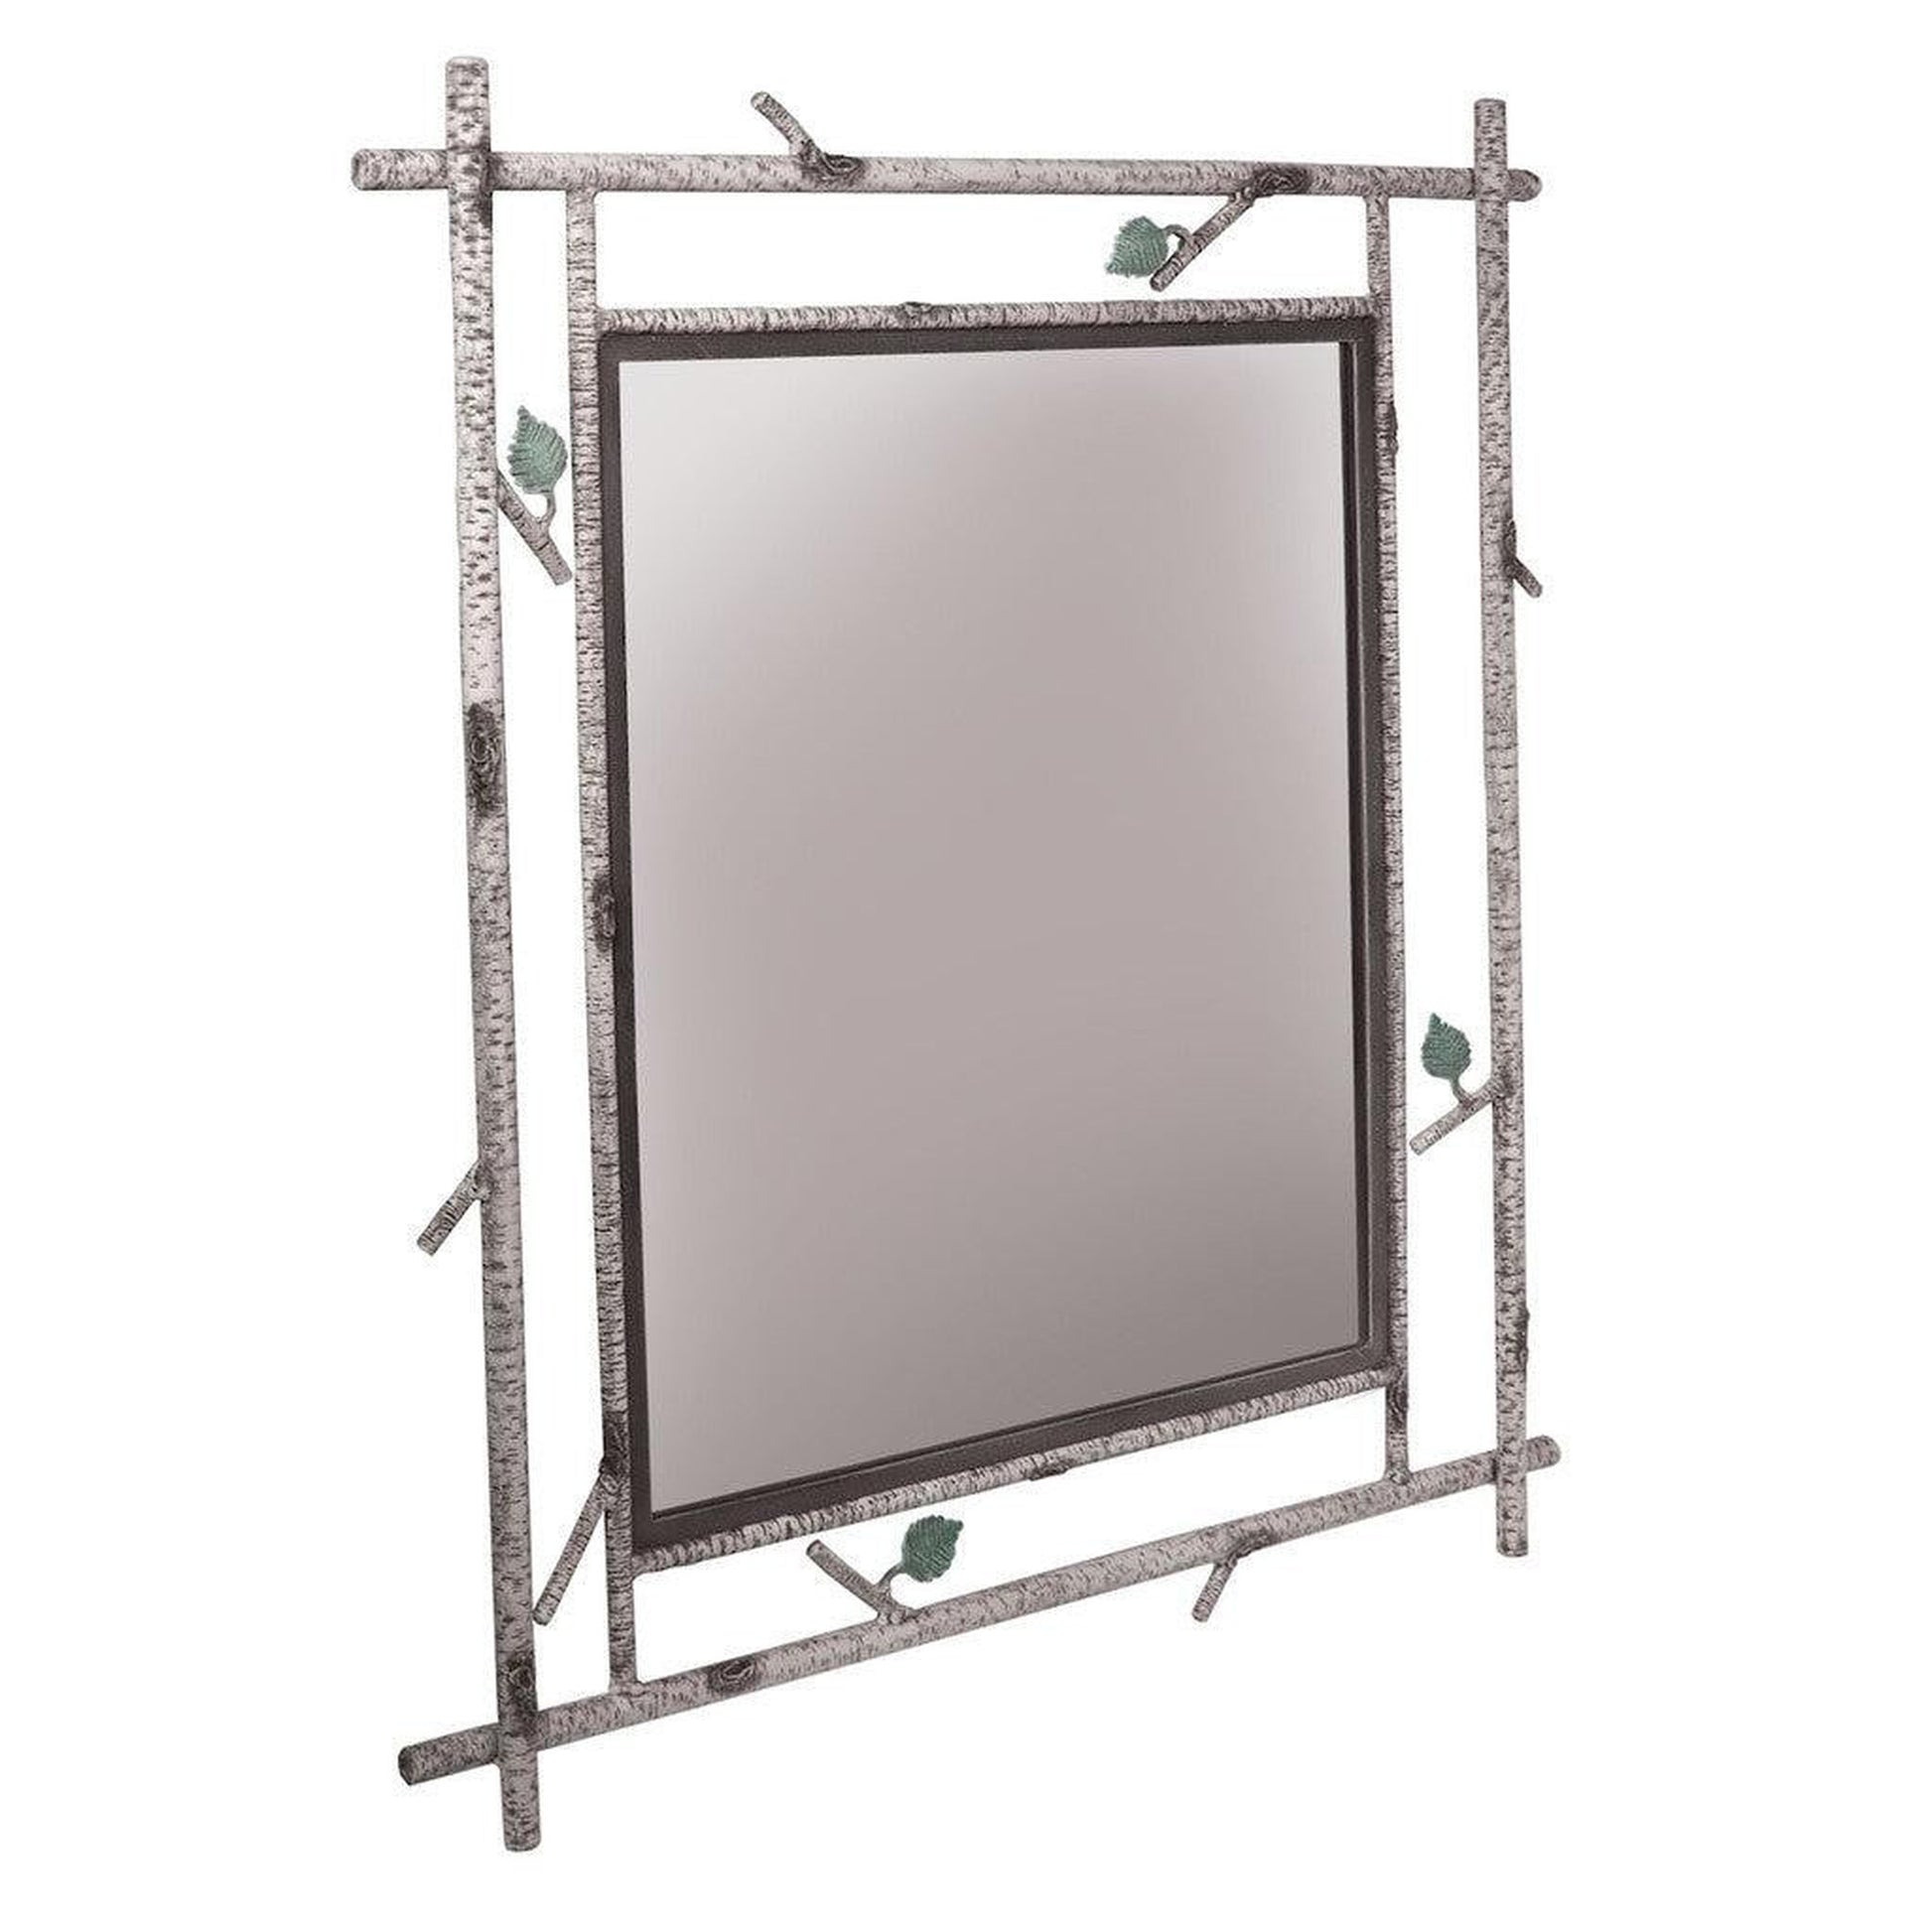 Stone County Ironworks Whisper Creek 30" x 34" Small Hand Rubbed Bronze Iron Wall Mirror With Copper Iron Accent